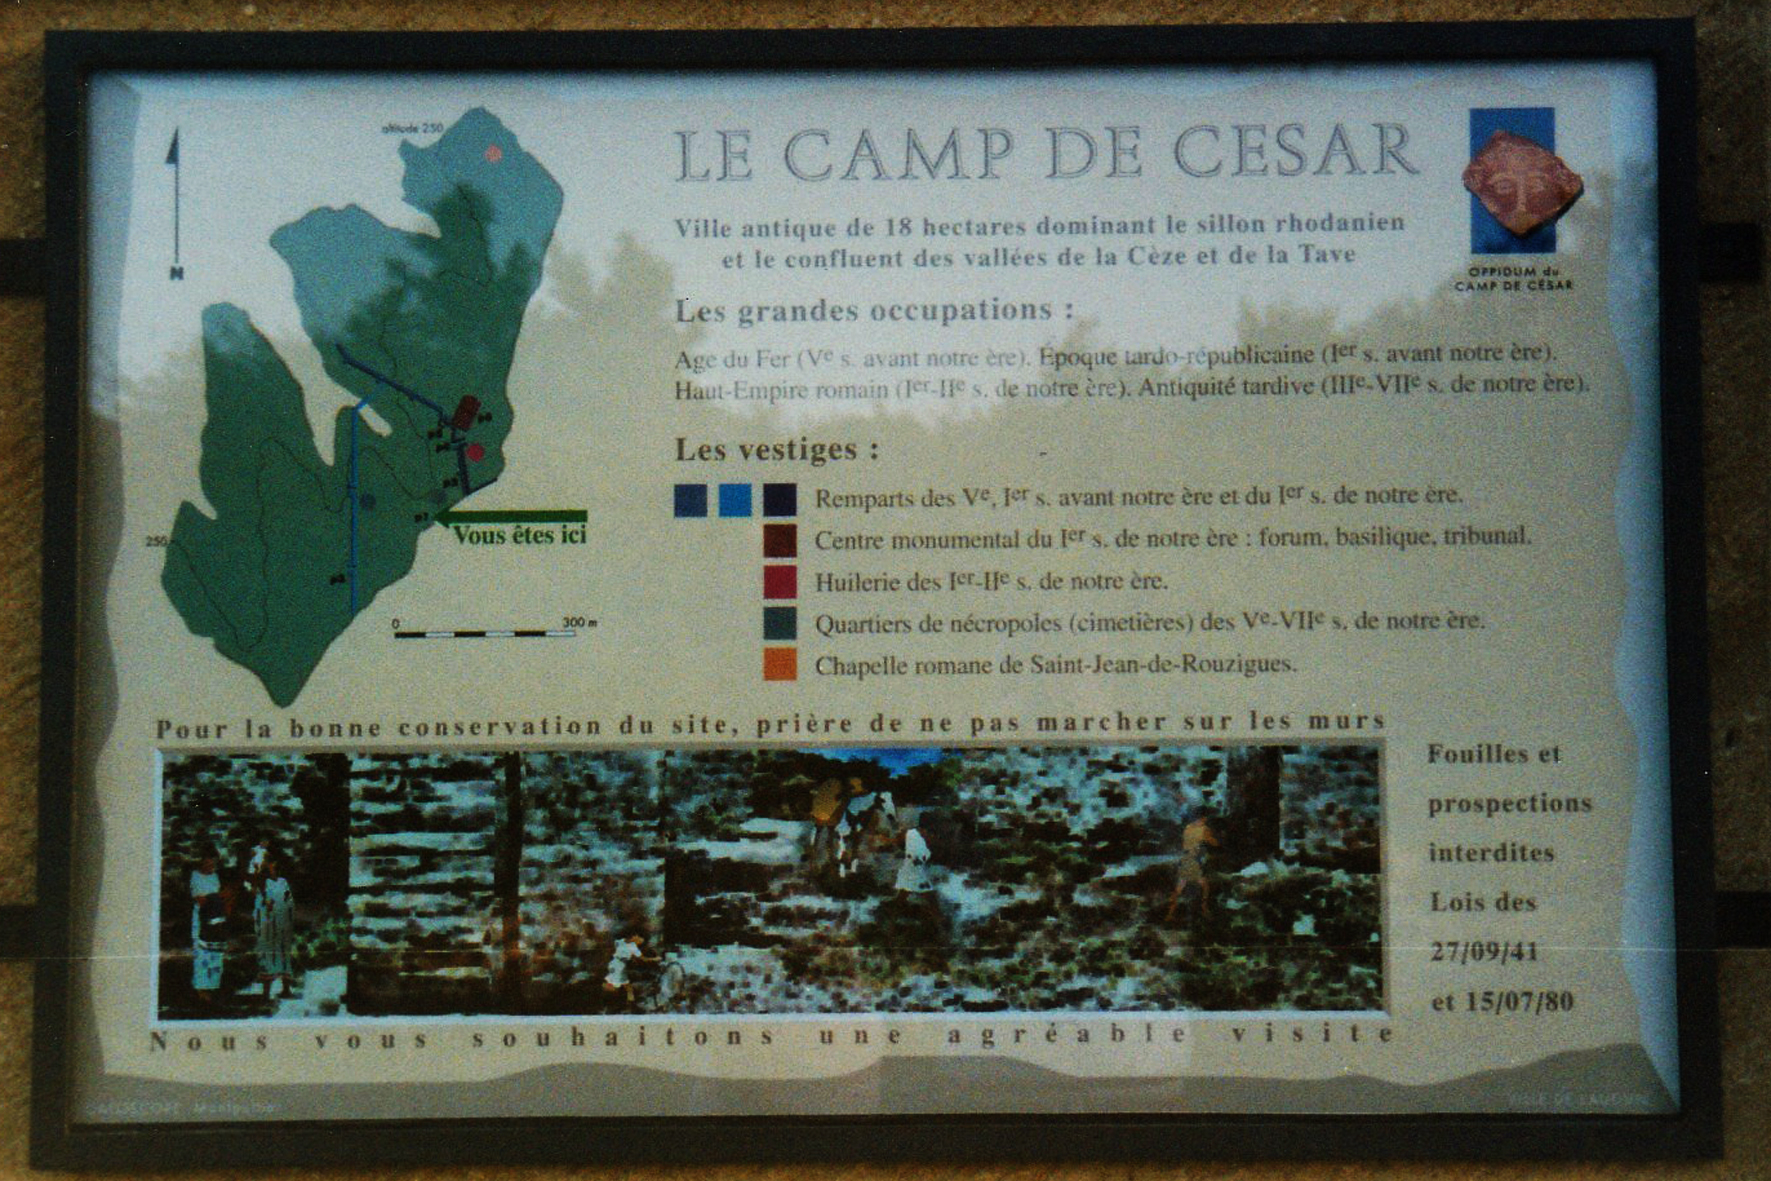 One of the info plaques on site